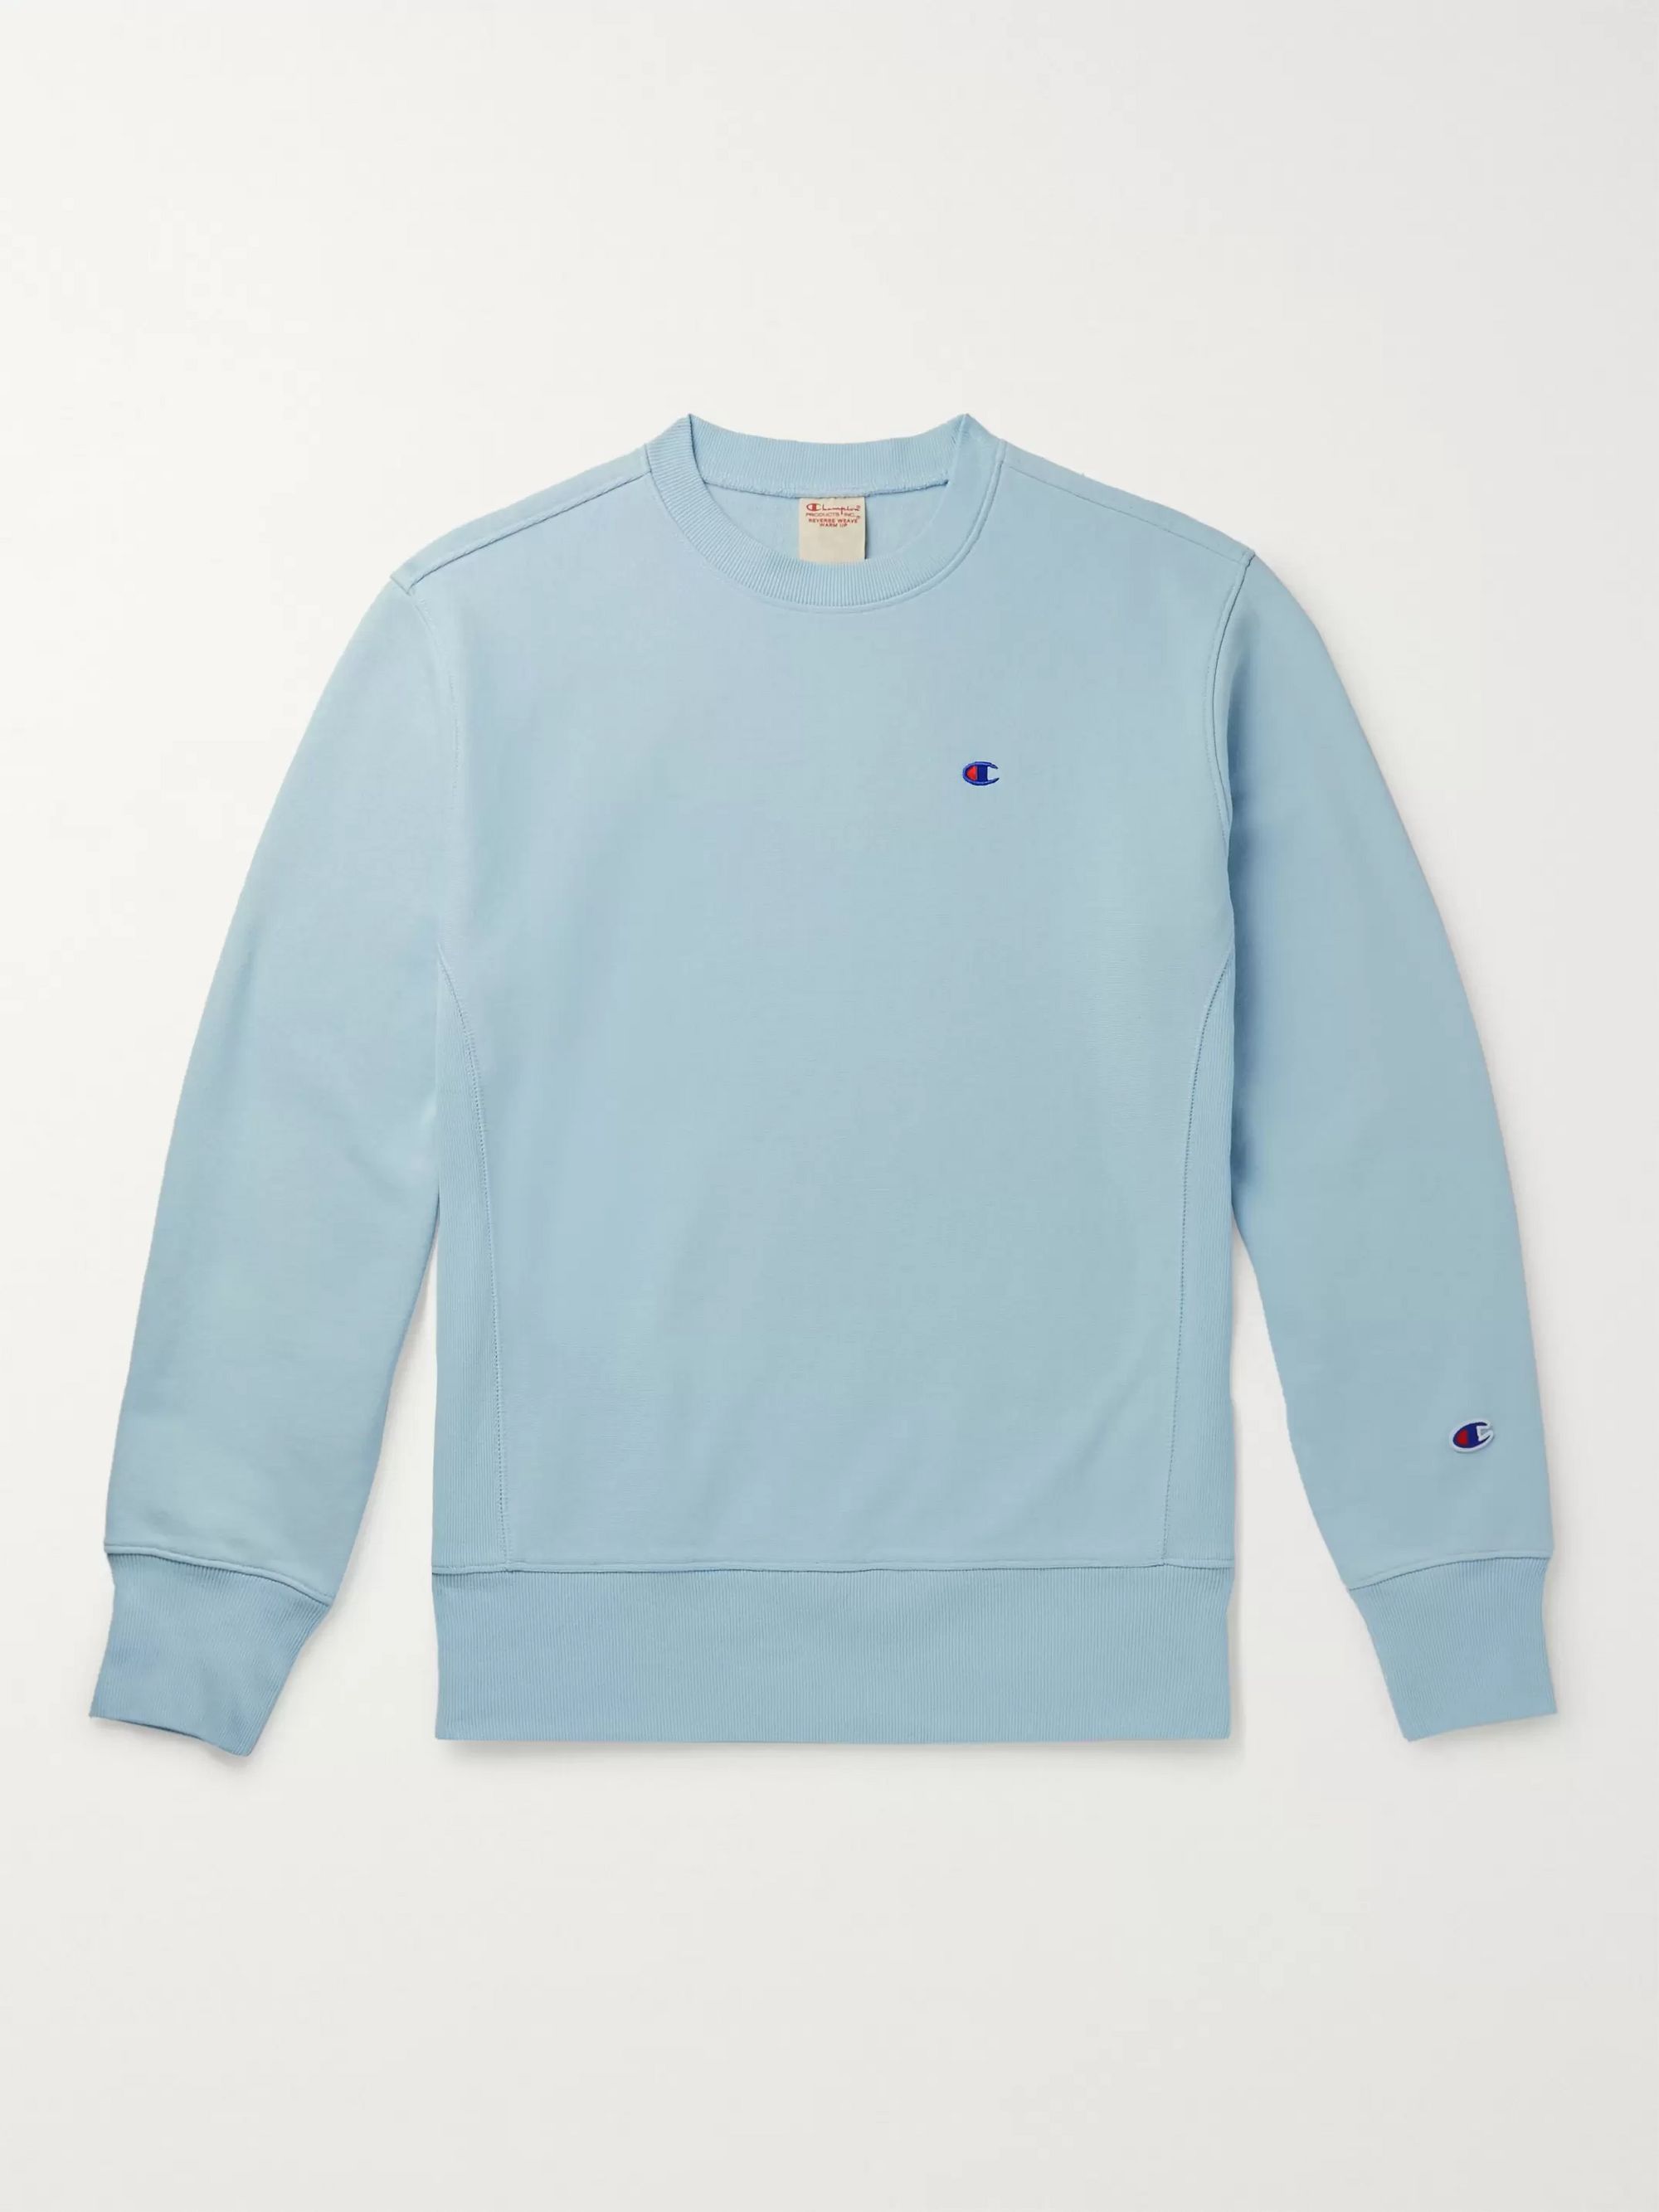 champion embroidered sweater